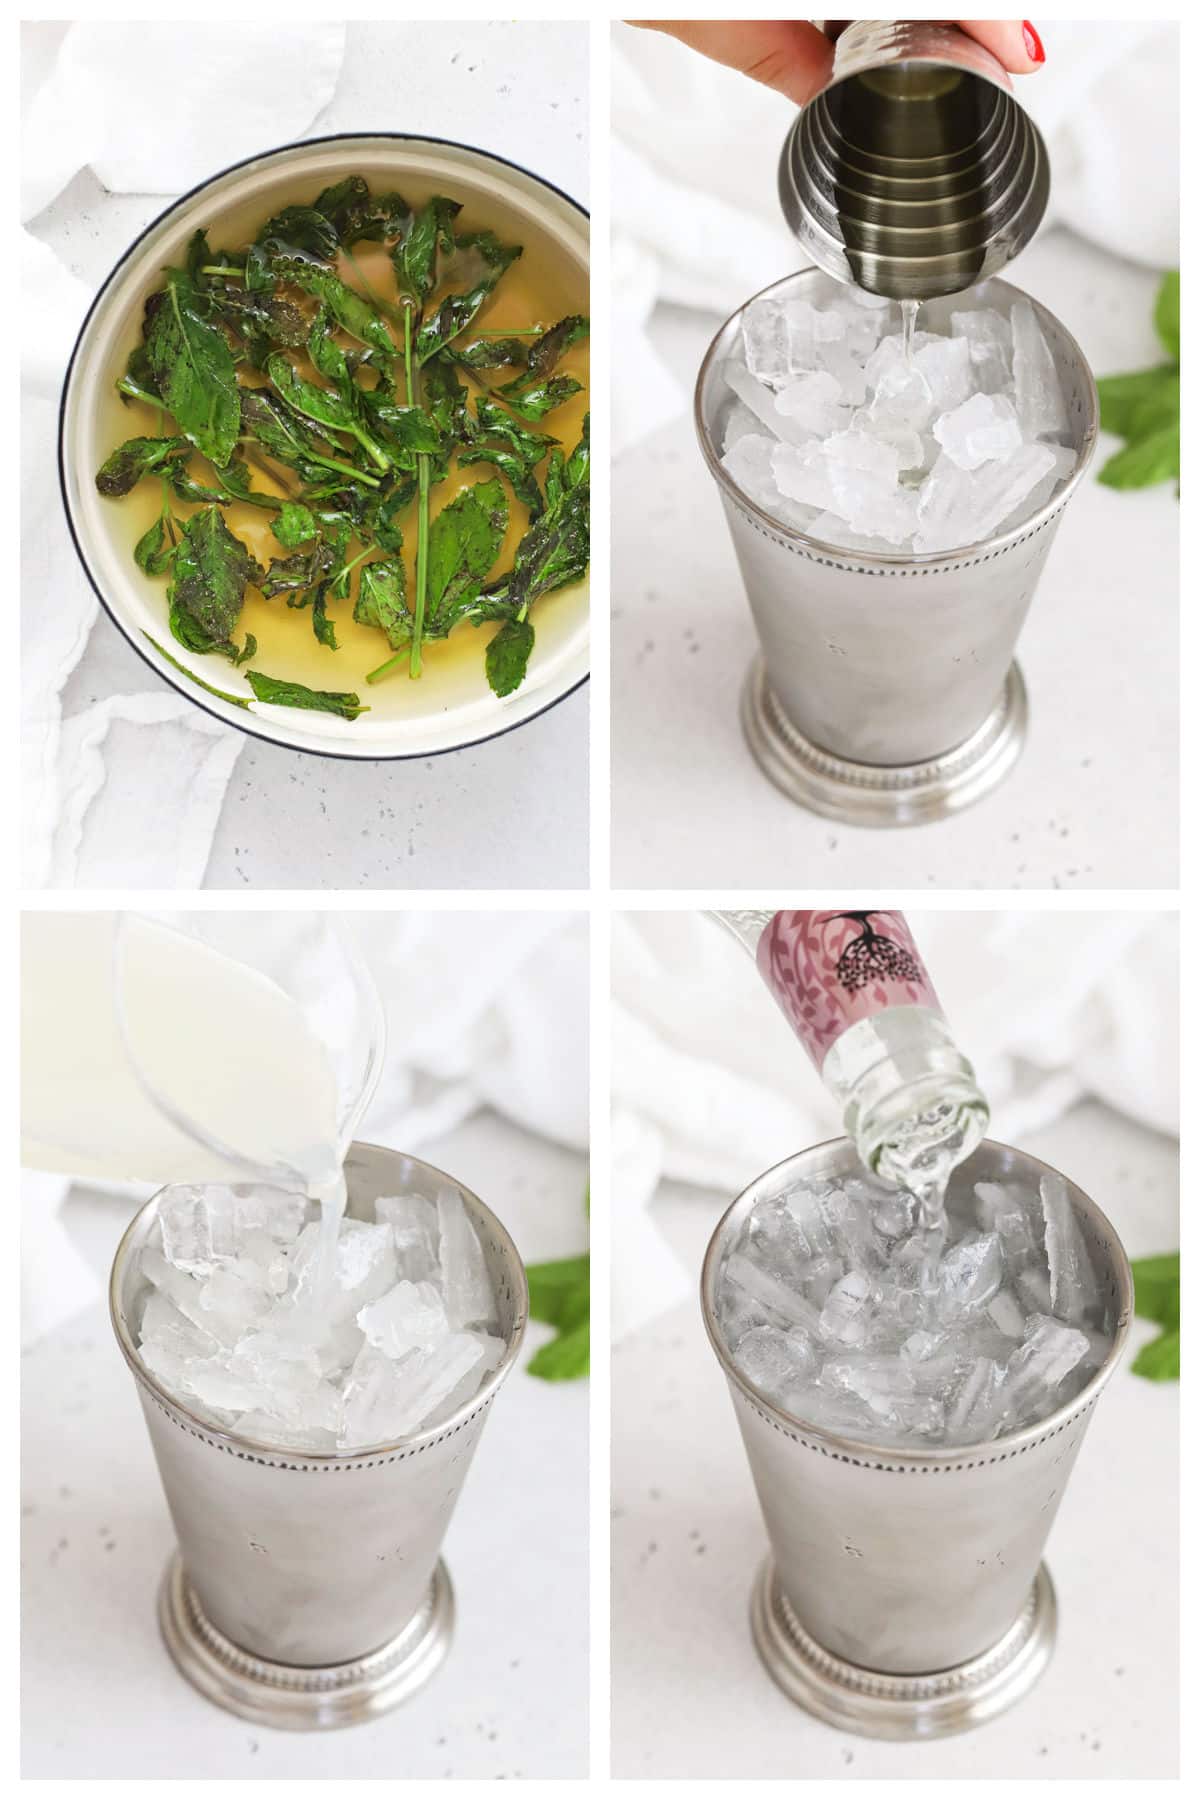 making non-alcoholic mint julep step by step